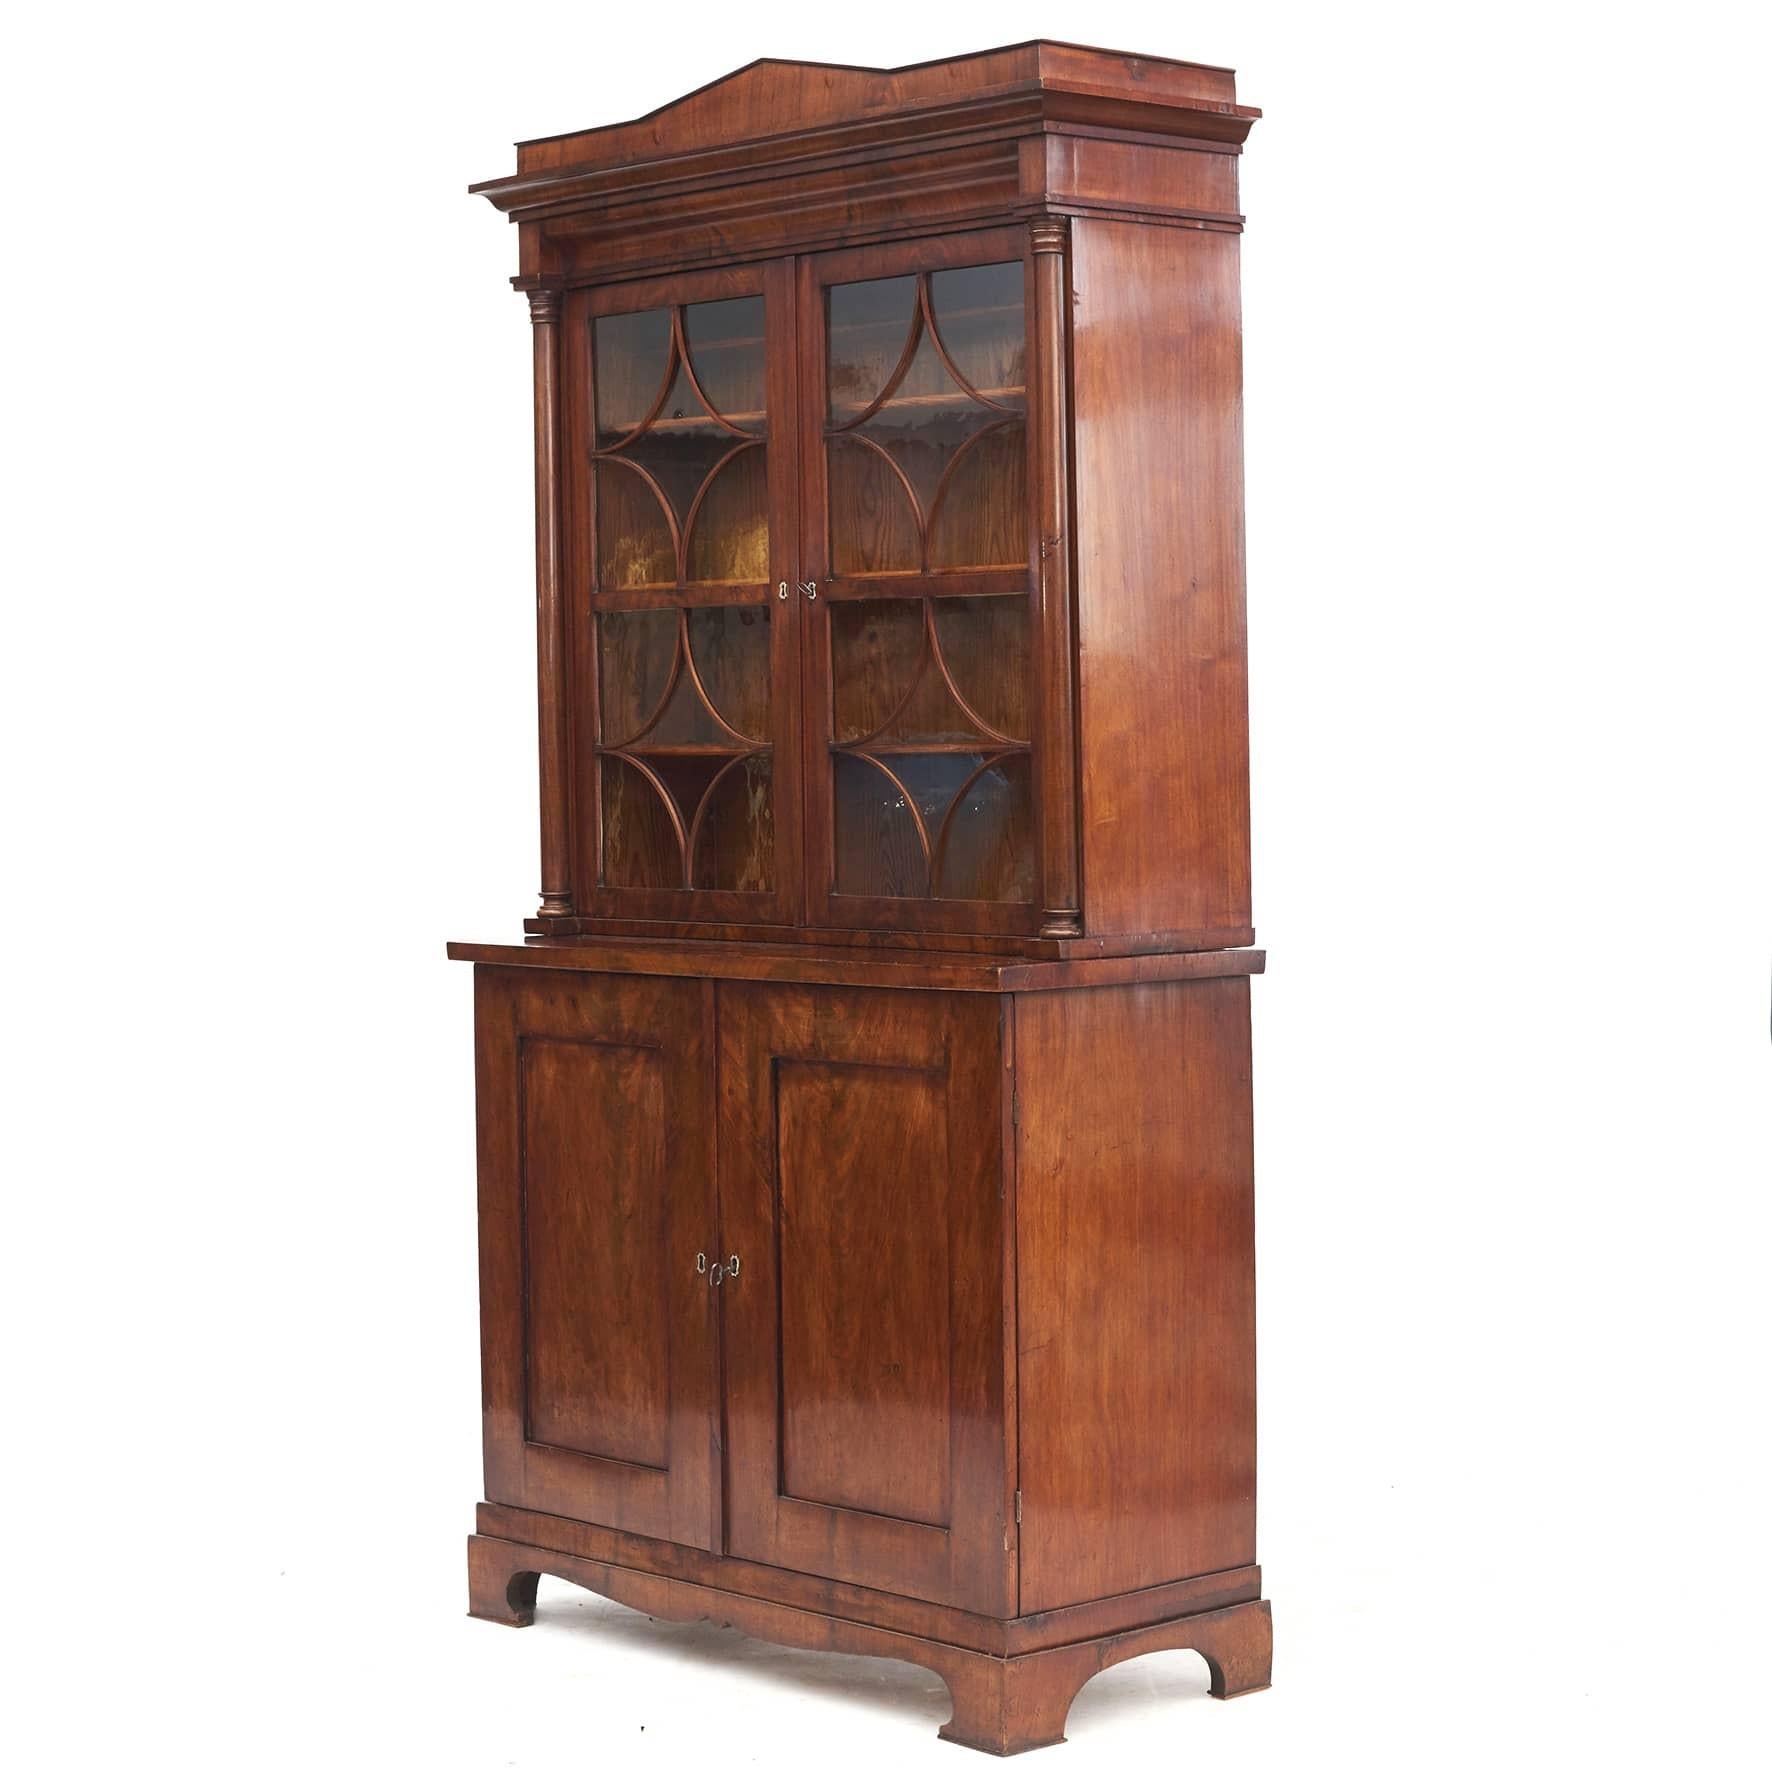 Biedermeier bookcase in mirror-cut flamed mahogany. Neoclassical style.
In 2 parts: Wall cabinet with architectural top. Pair of glass doors and concave bars with lemon marquetry, flanked by free-standing columns.
Base cabinet with a pair of doors